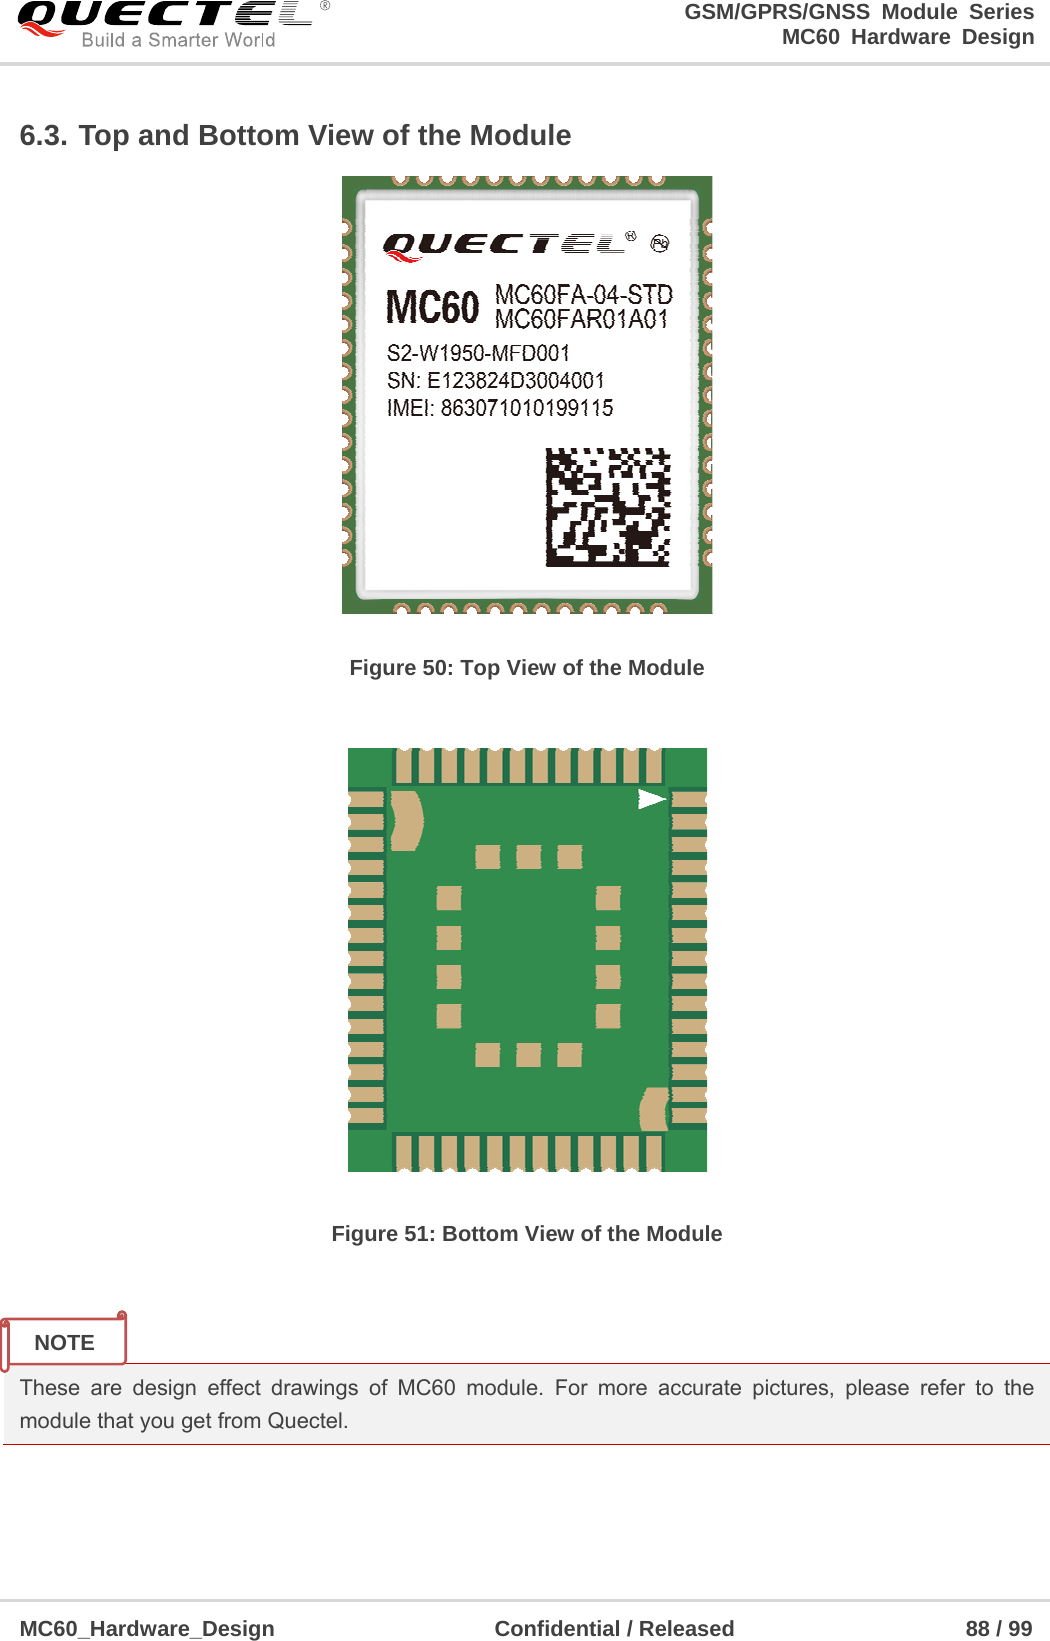                                                                     GSM/GPRS/GNSS Module Series                                                                 MC60 Hardware Design  MC60_Hardware_Design                    Confidential / Released                     88 / 99     6.3. Top and Bottom View of the Module  Figure 50: Top View of the Module   Figure 51: Bottom View of the Module   These are design effect drawings of MC60 module. For more accurate pictures, please refer to the module that you get from Quectel.    NOTE 